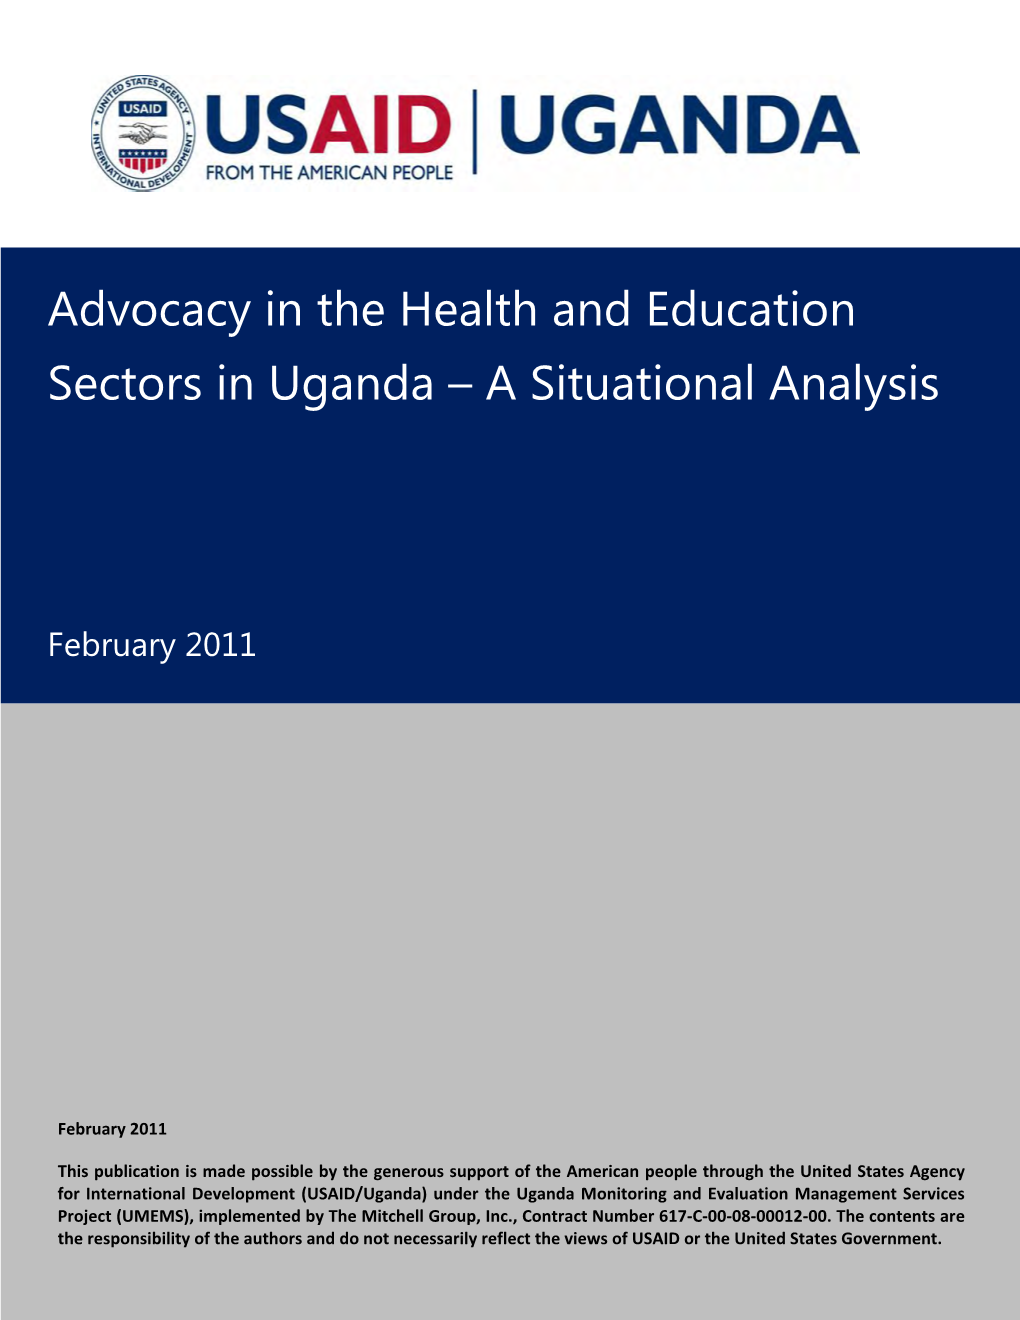 Advocacy in the Health and Education Sectors in Uganda – a Situational Analysis